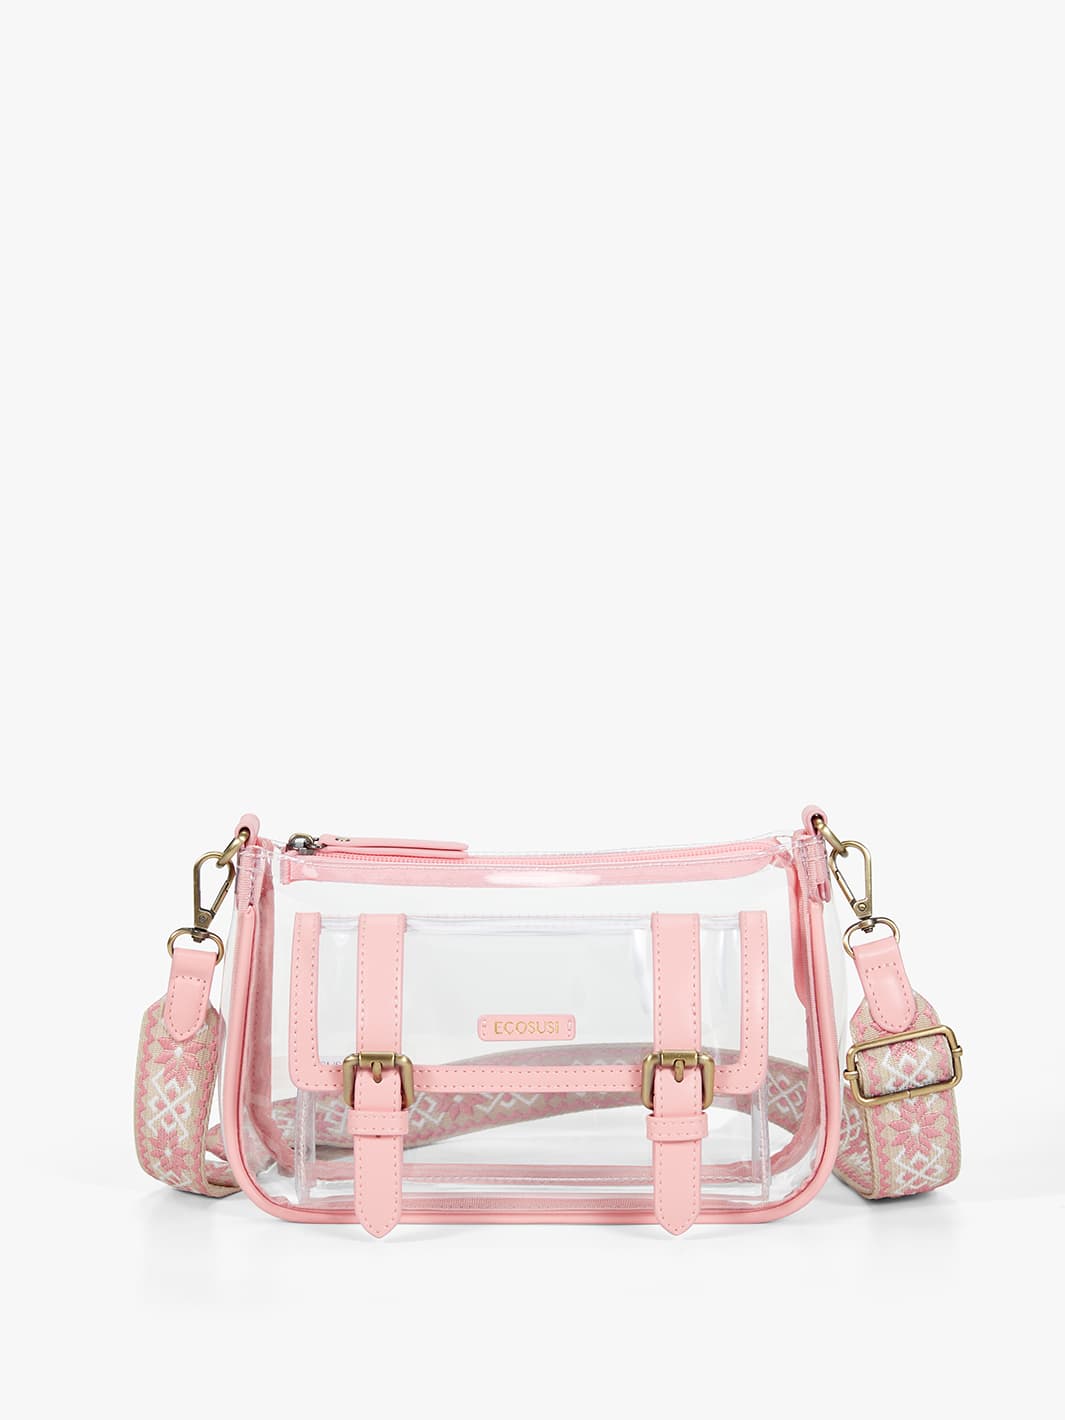 Clear Crossbody Bags with Stylish Style - ECOSUSI Pink Crossbody Bag